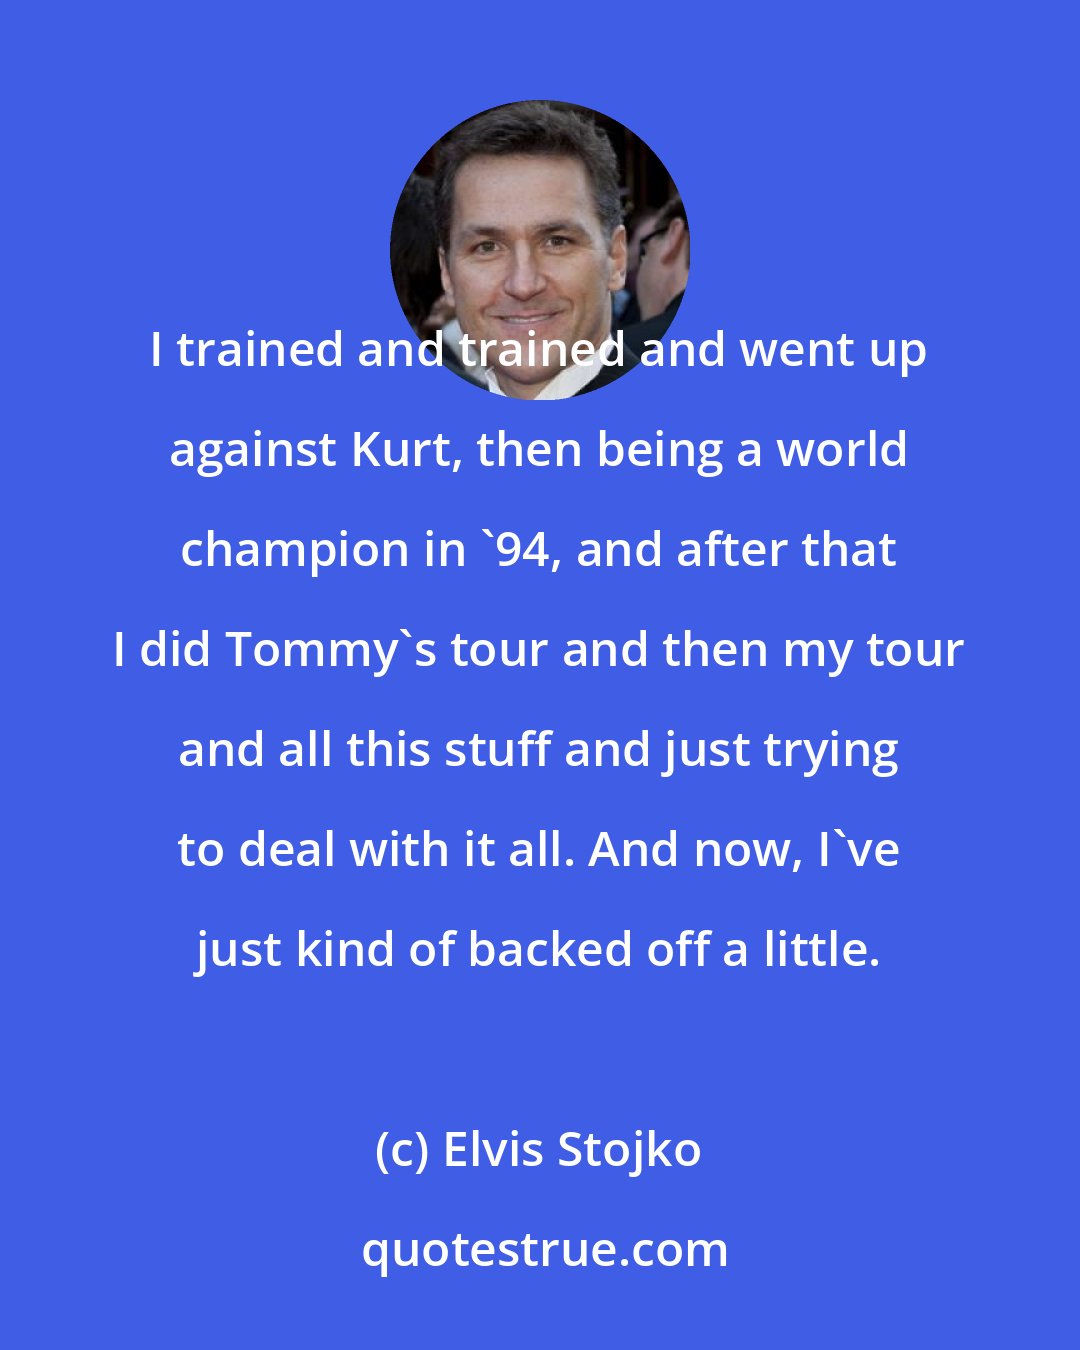 Elvis Stojko: I trained and trained and went up against Kurt, then being a world champion in '94, and after that I did Tommy's tour and then my tour and all this stuff and just trying to deal with it all. And now, I've just kind of backed off a little.